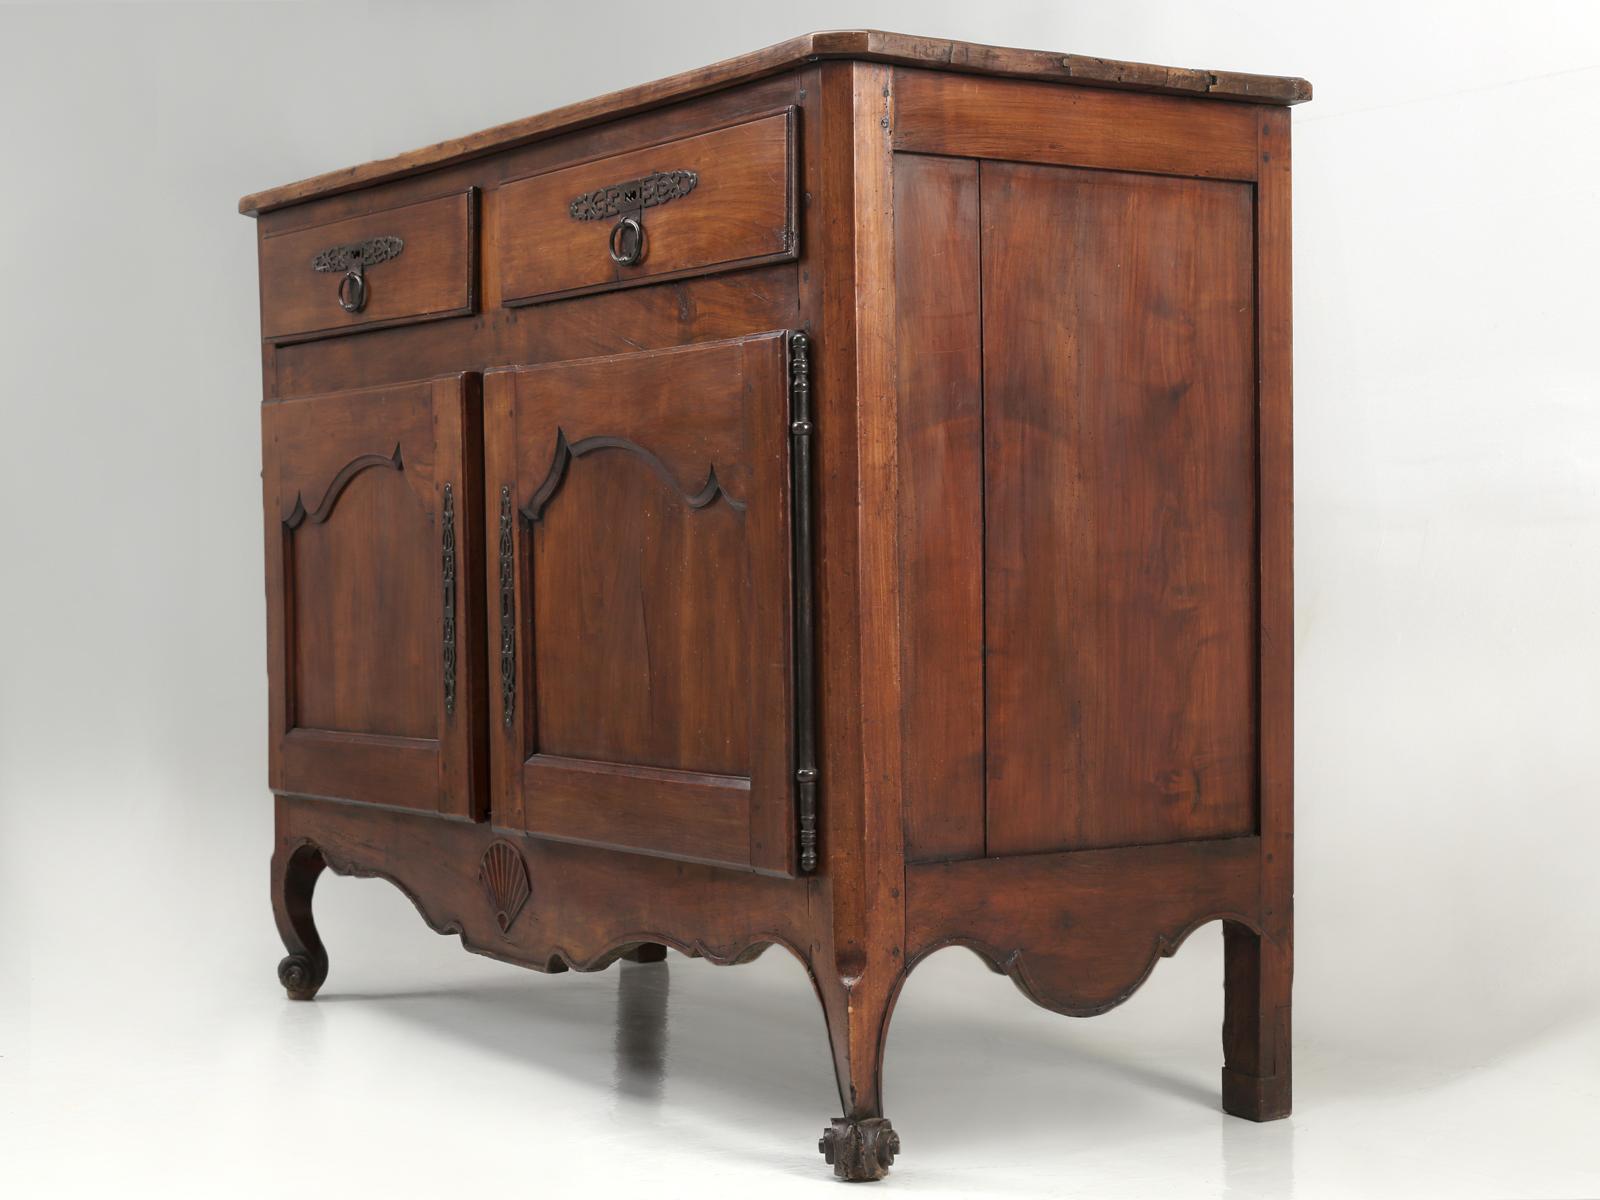 Antique French Louis XV style buffet constructed from solid French cherrywood, with stylized shell carving on a scalloped apron. Our antique French Louis XV style buffet, was restored in France before being shipped to the states. This antique French